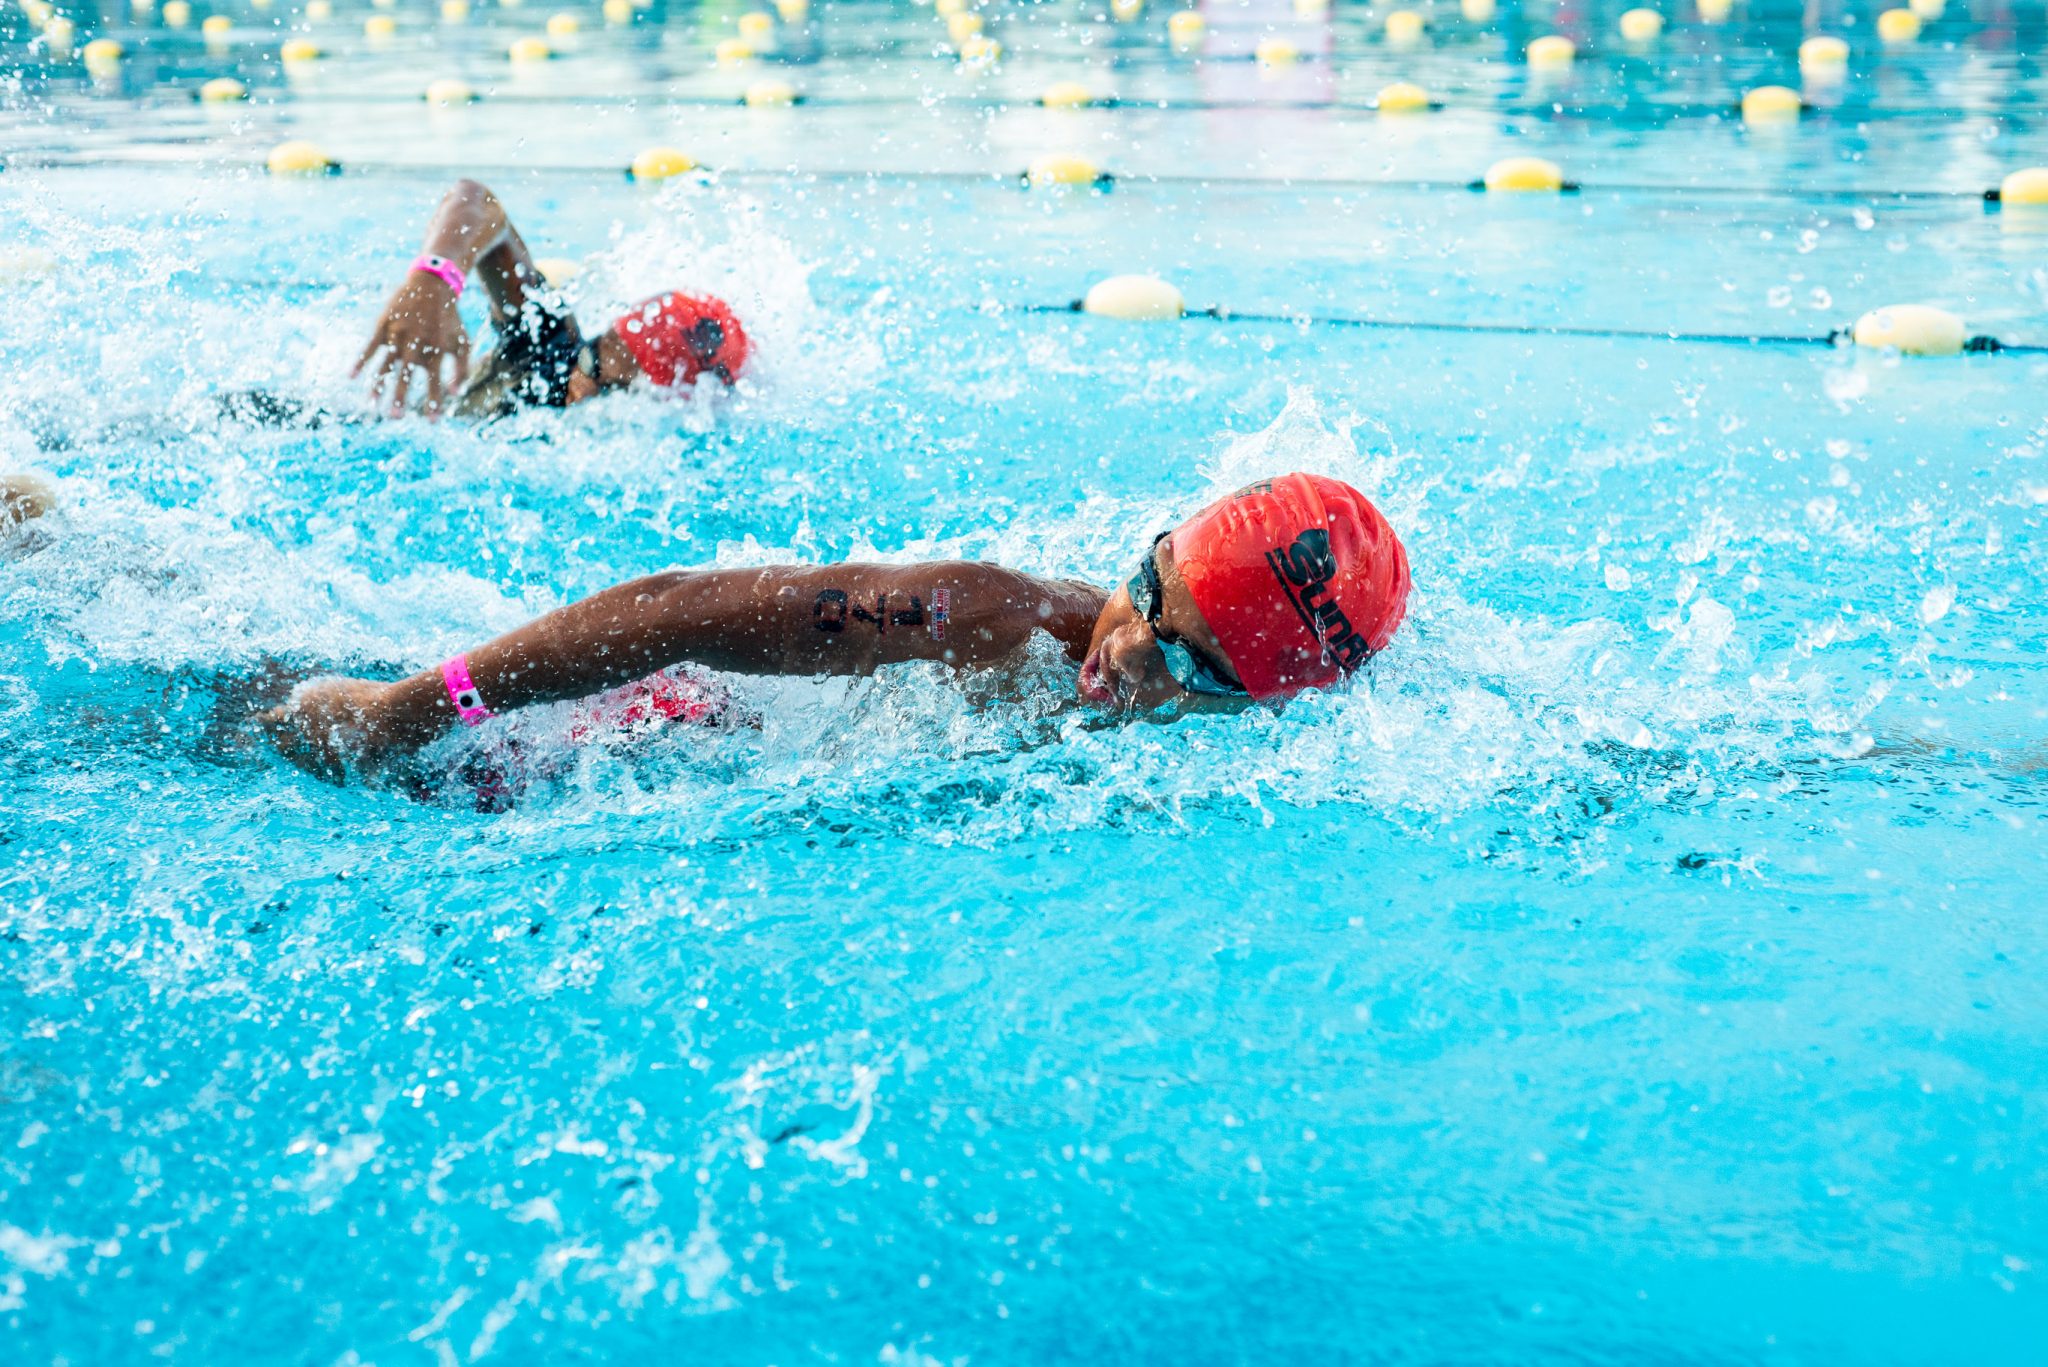 Competitors in the 13-14 age group had to complete a 400-meter swim followed by a three-kilometer run in the Alaska IronKids race